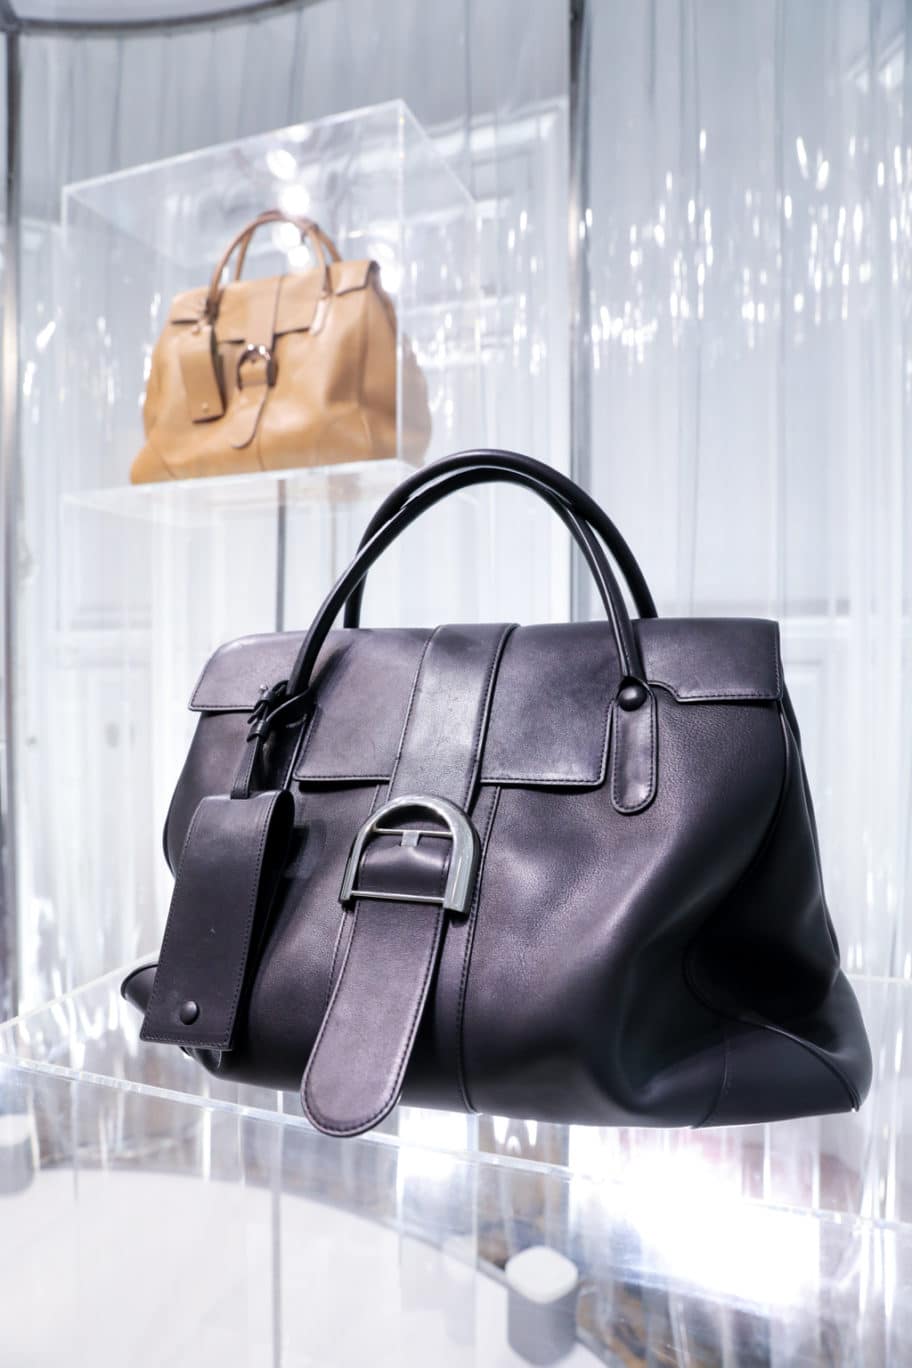 Preview Of Delvaux Spring/Summer 2019 Bag Collection - Spotted Fashion